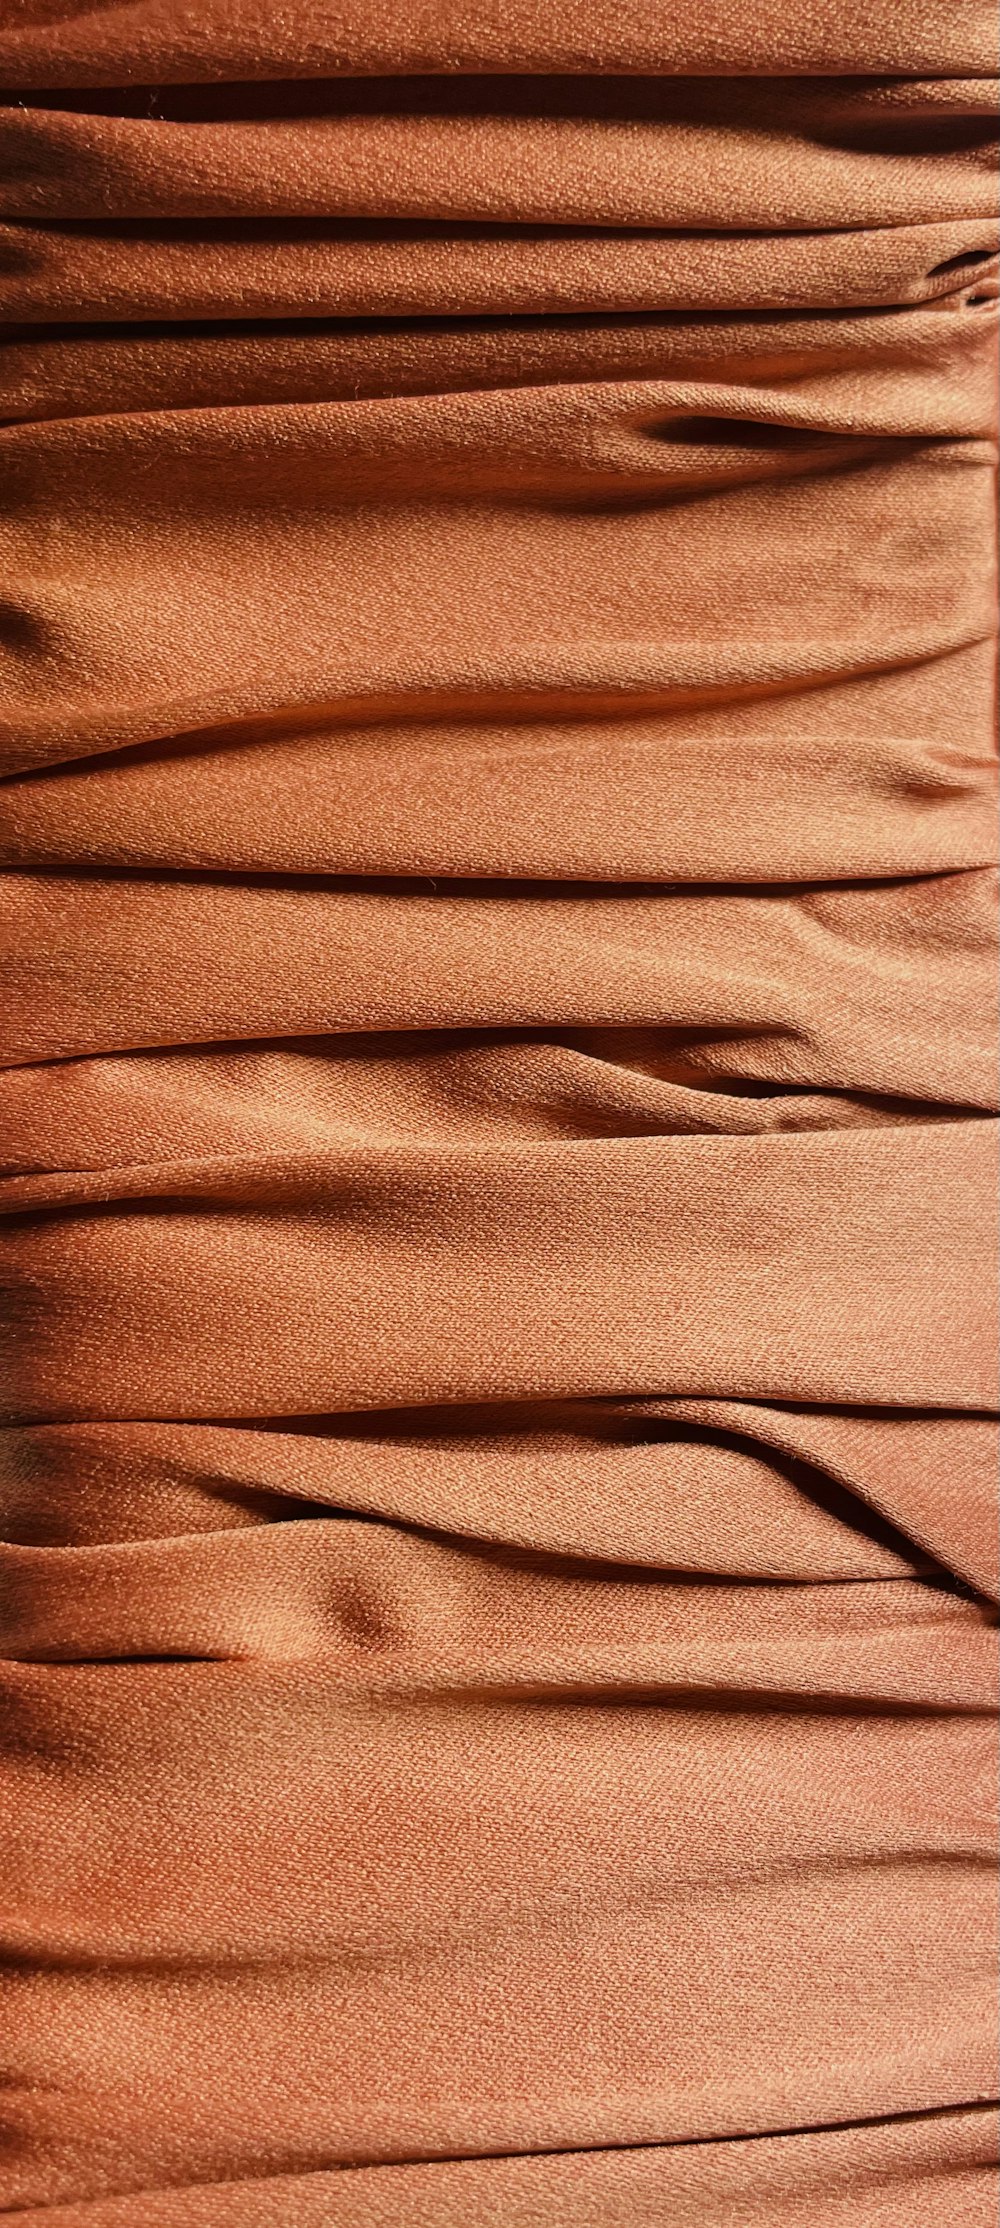 a close up view of a brown cloth